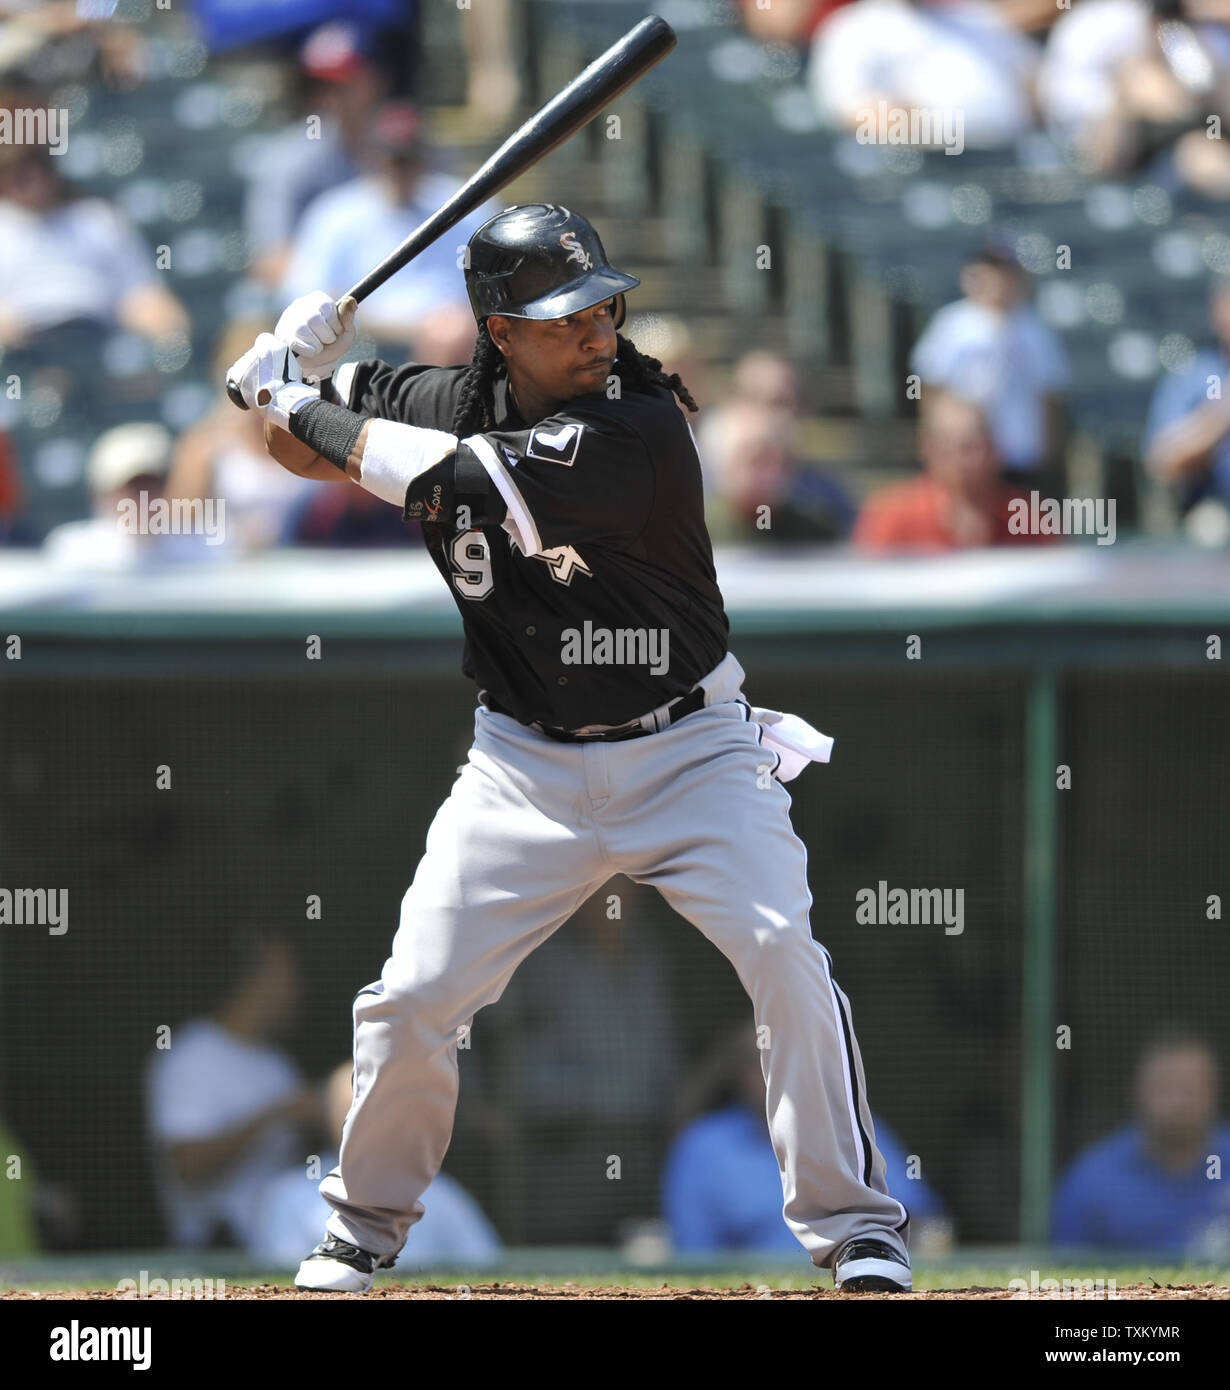 Chicago White Sox designated hitter Manny Ramirez bats in the fourth inning  of a baseball game against the Cleveland Indians at Progressive Field in  Cleveland on Wednesday, September 1, 2010. UPI/David Richard